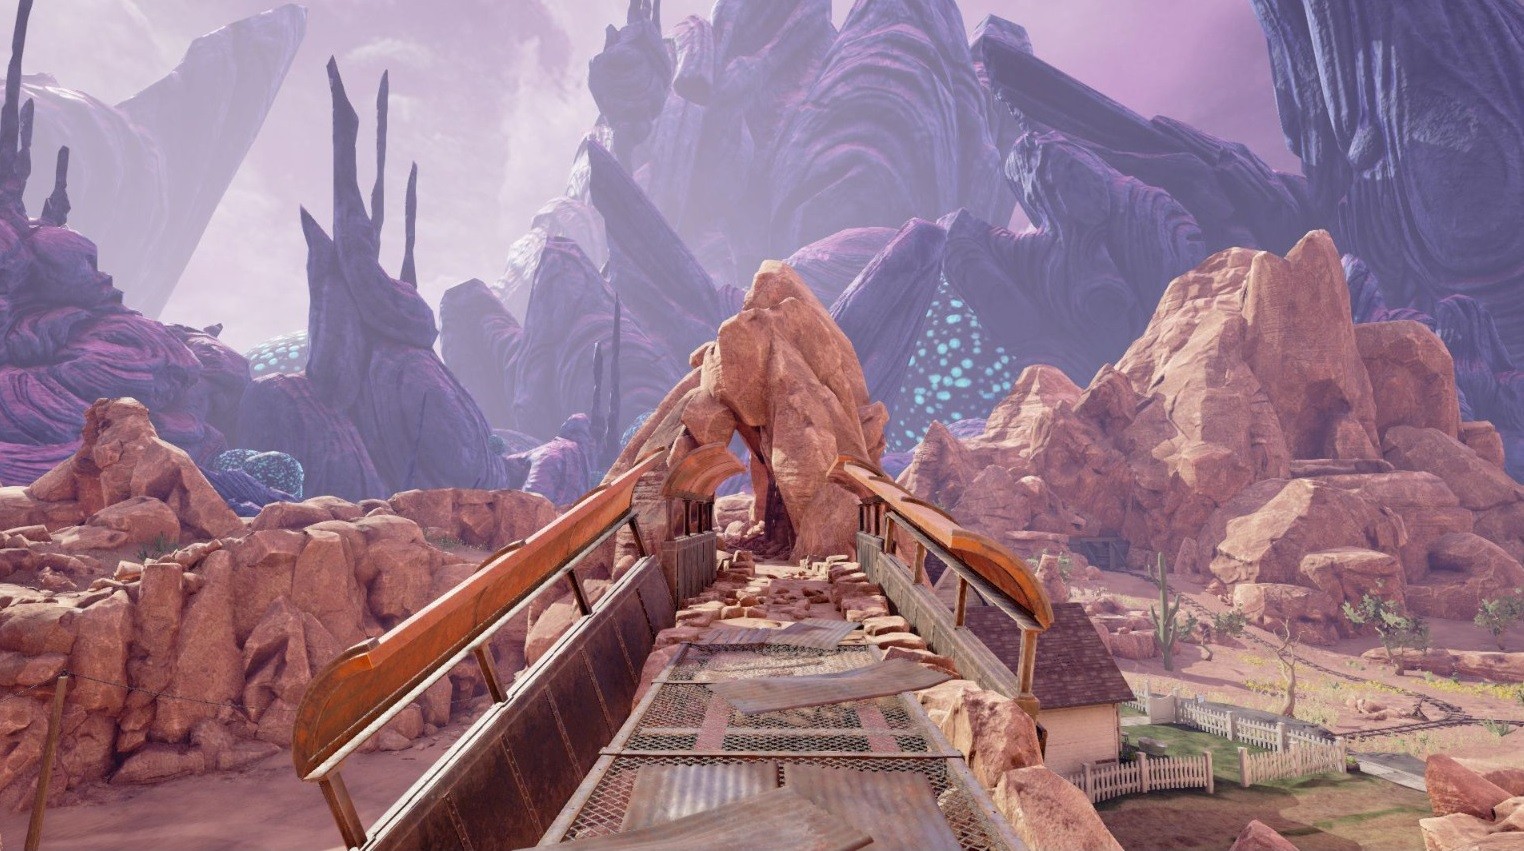 free download obduction mac